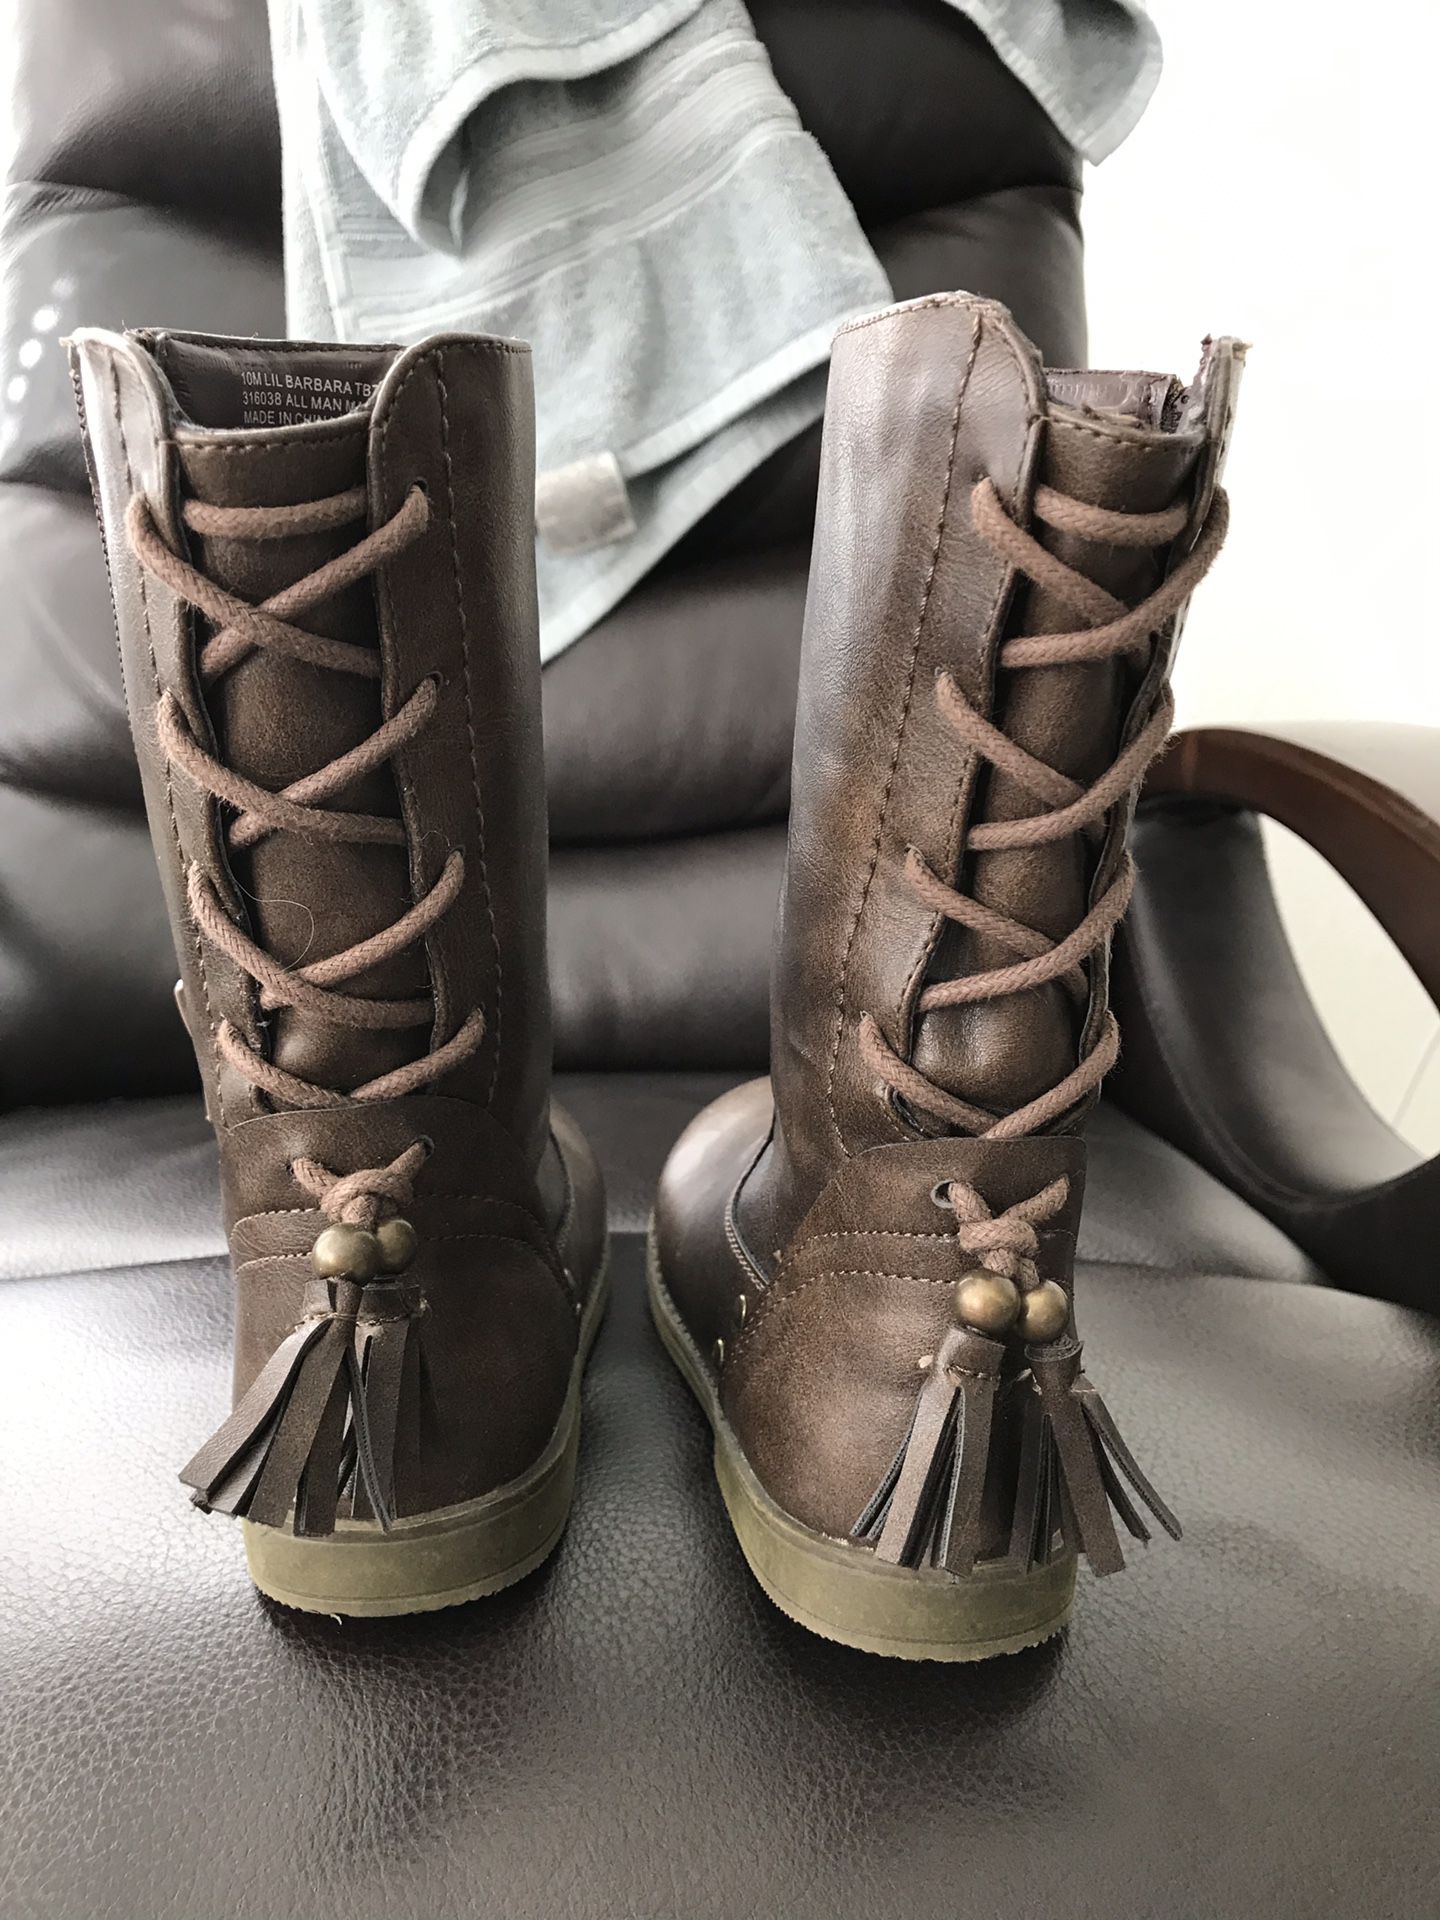 Size 10 girls leather boots